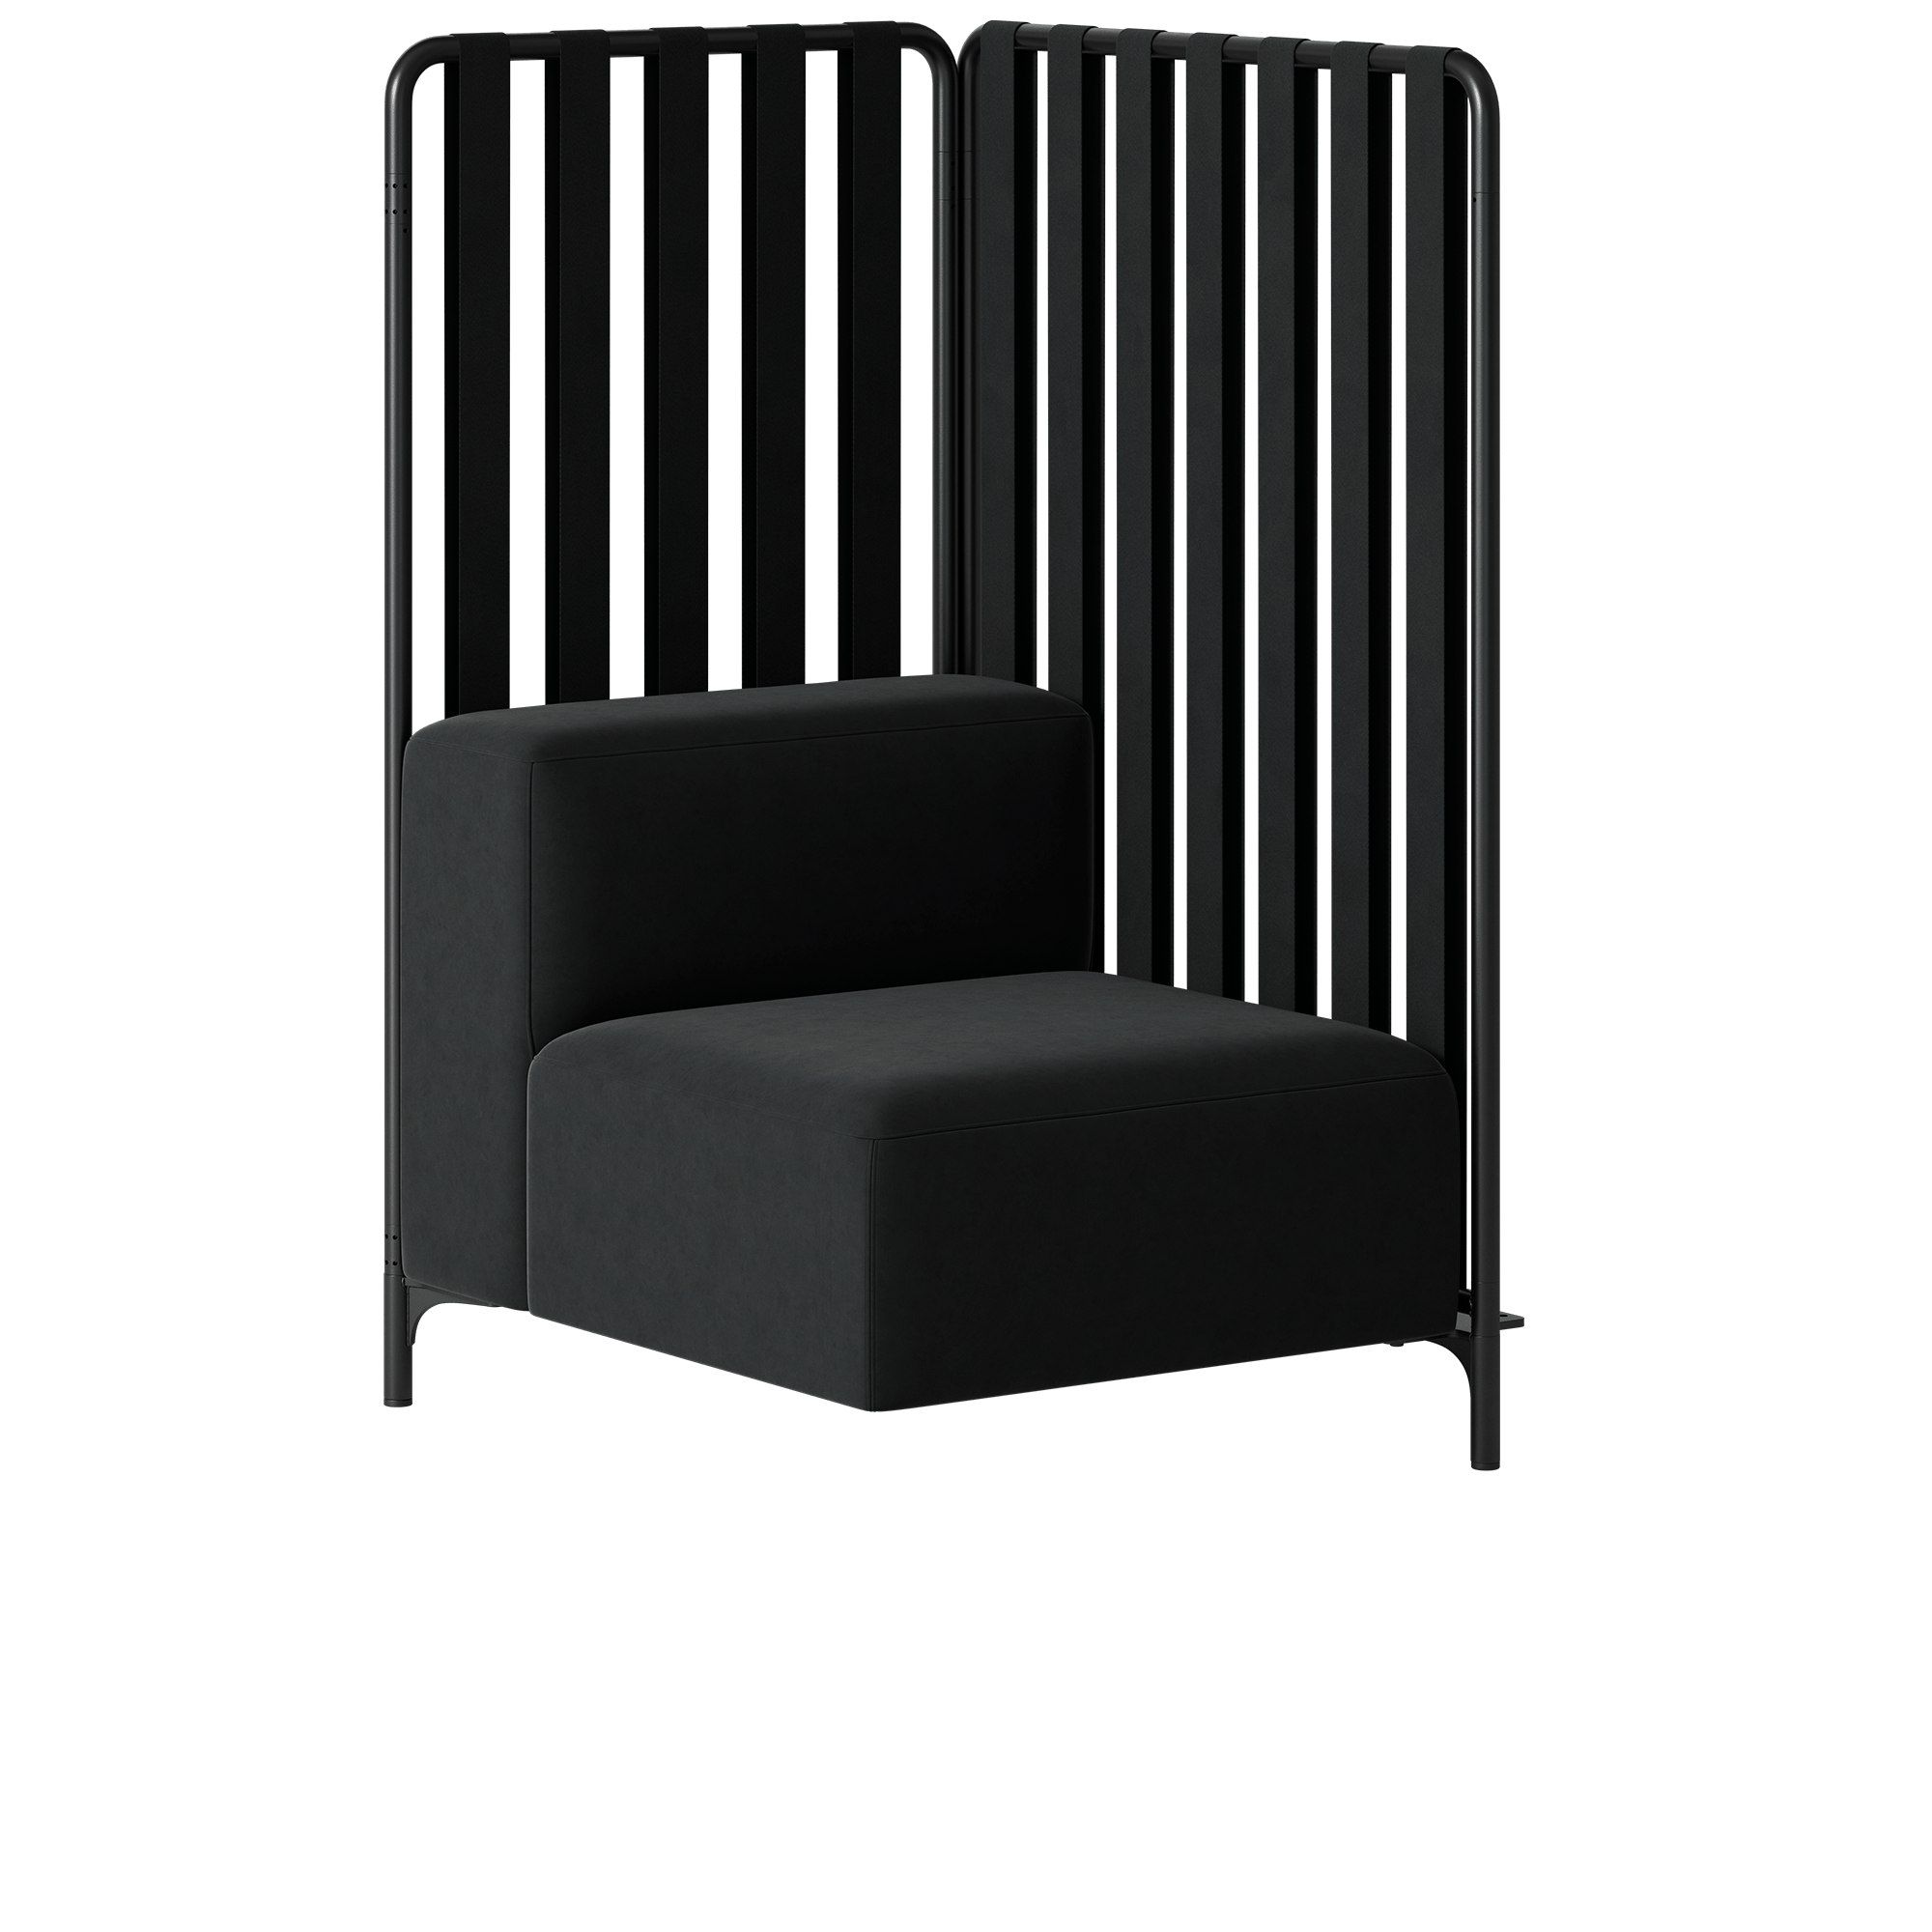 A black lounge chair corner with two panels, one at the back and one at the side